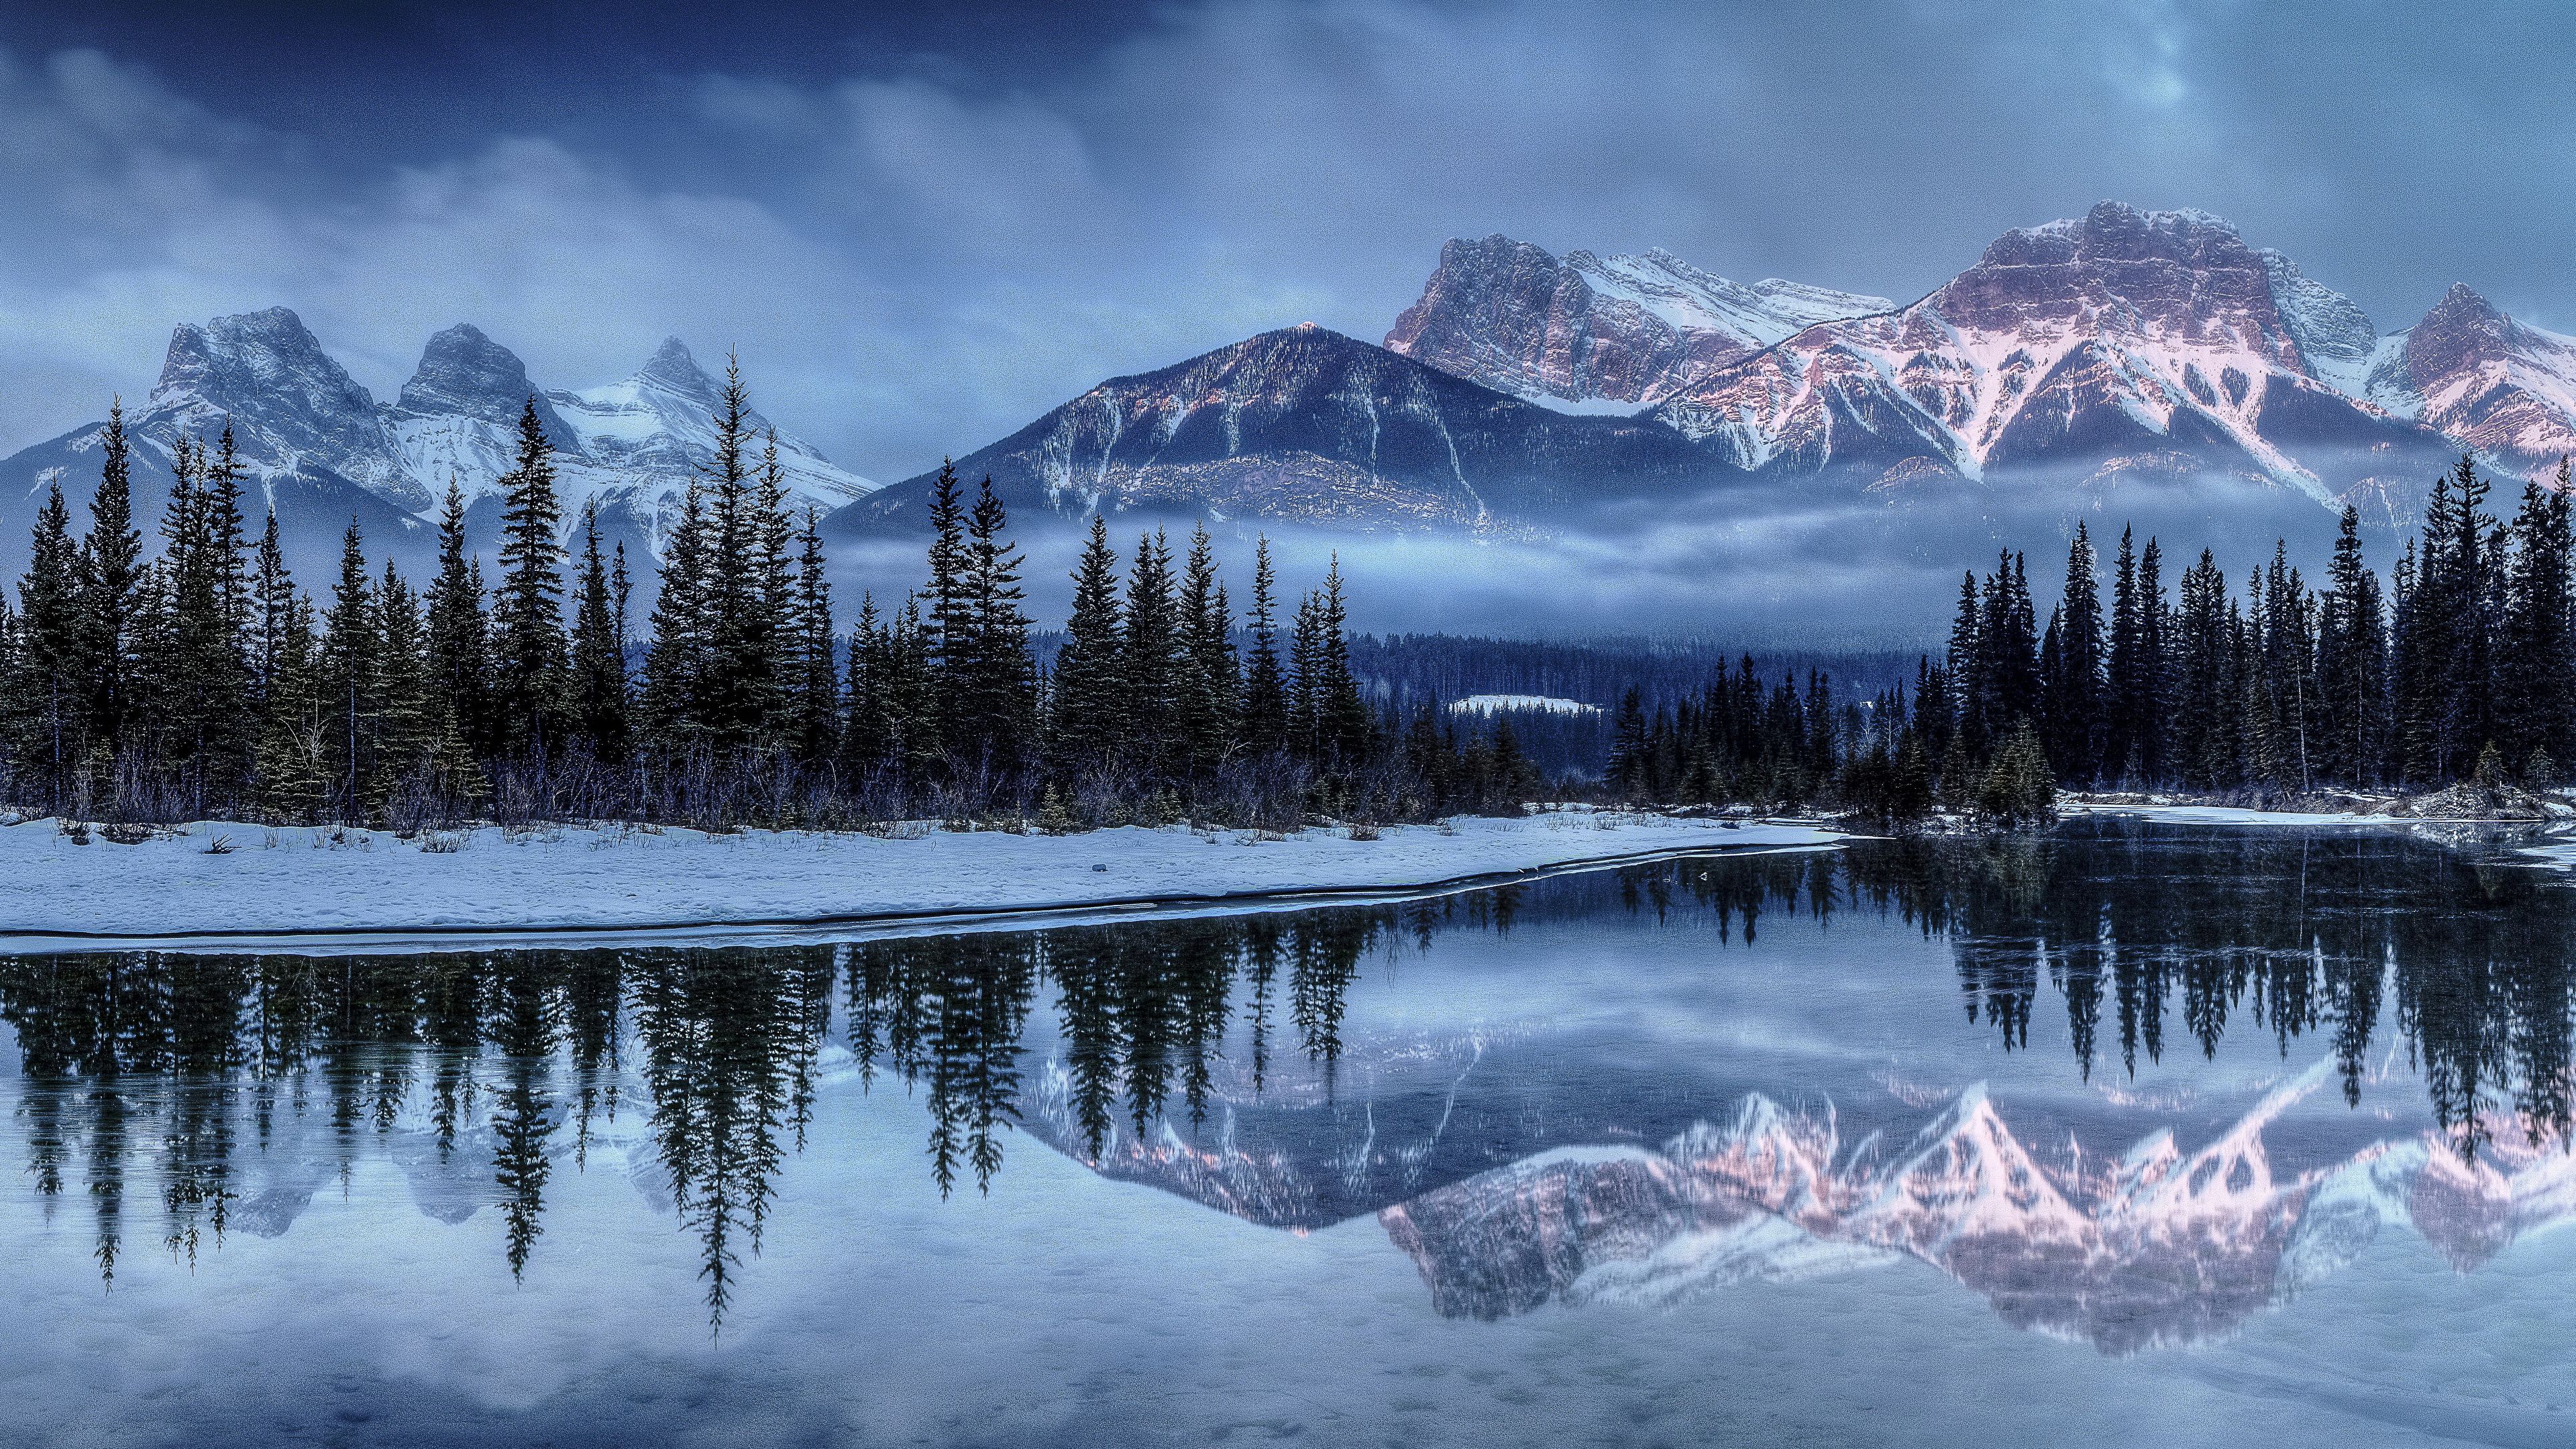 Picture Spruce Winter Nature Mountains Snow Lake Scenery 3840x2160